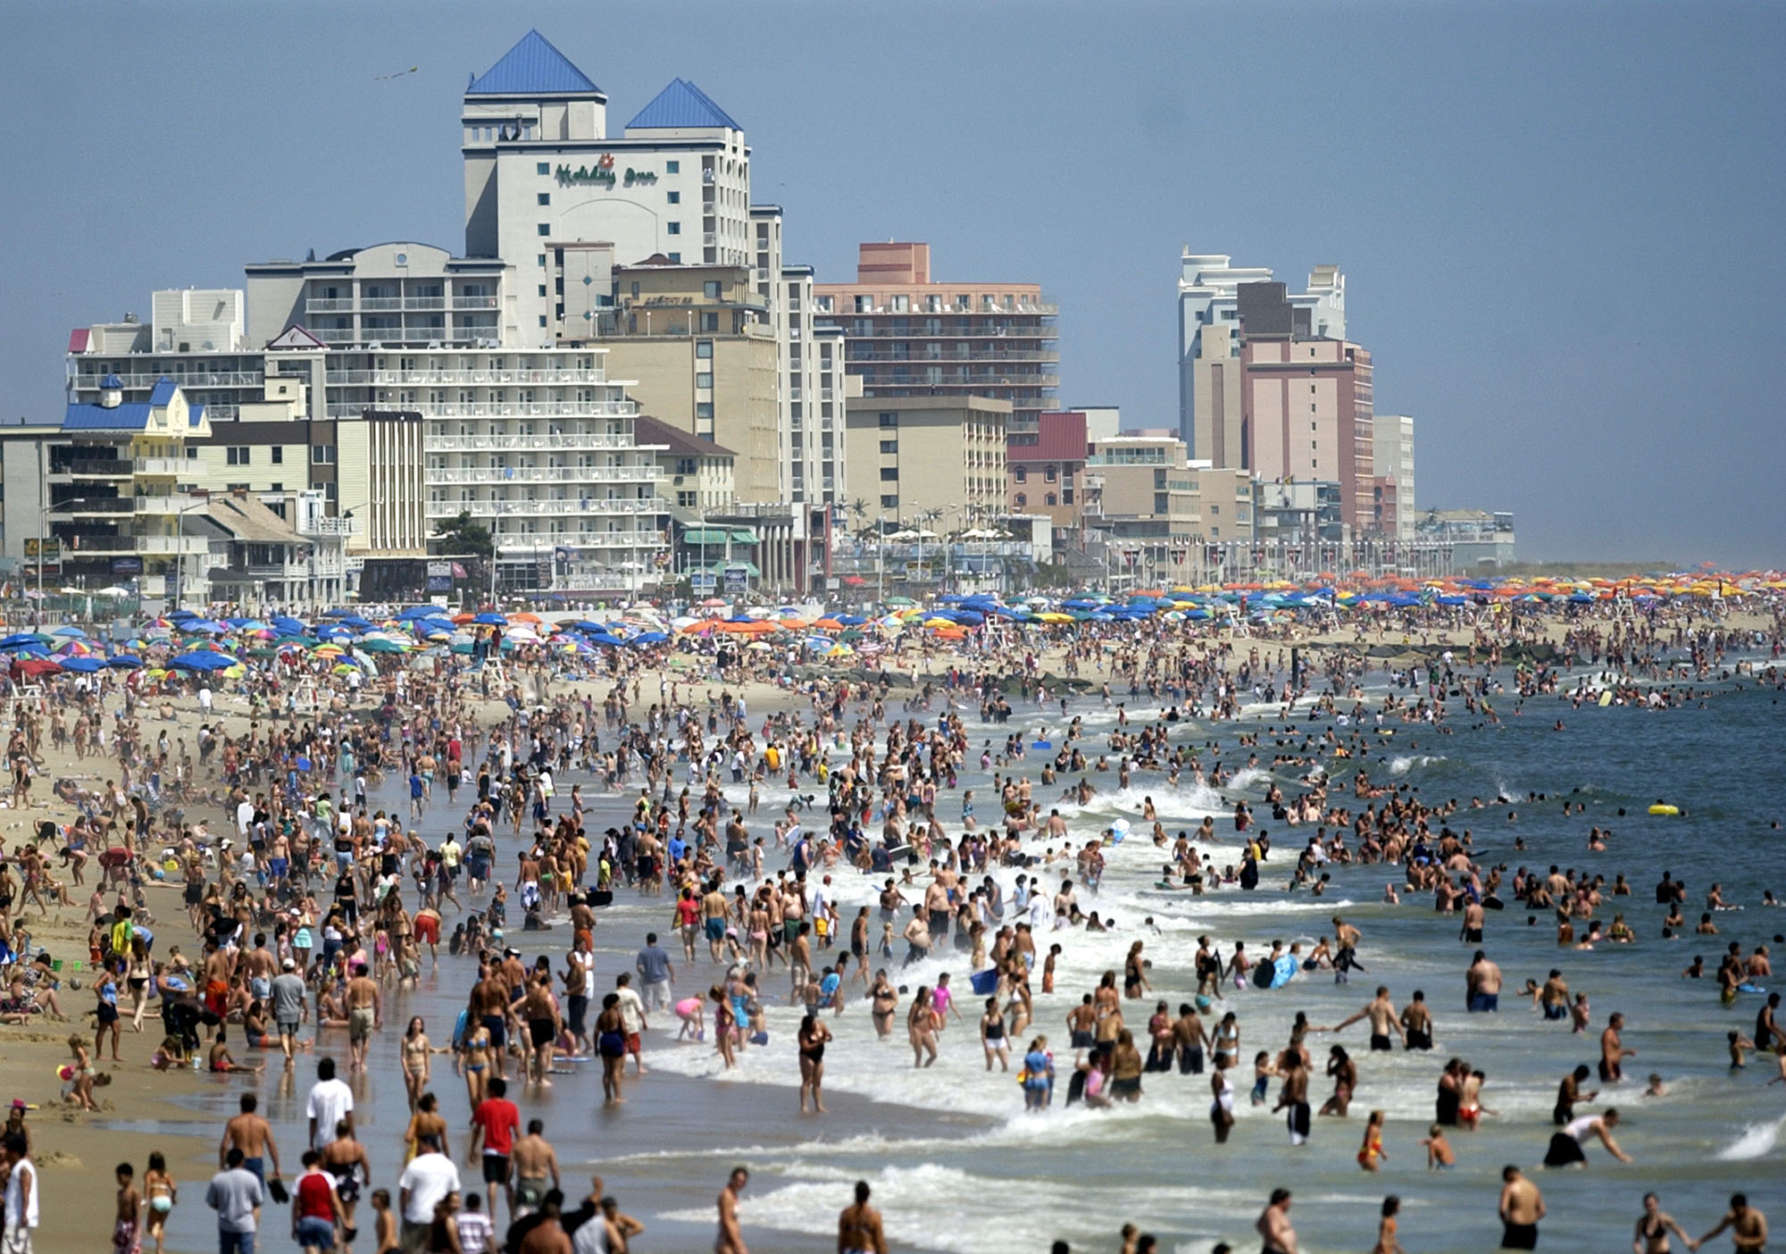 Sandwiched between the Atlantic Ocean and the Isle of Wright Bay, and just north of Assateague State Park, is Ocean City Maryland, home to 7,089 residents. However, the small resort town is anything but sleepy. (AP Photo/Matthew S. Gunby)